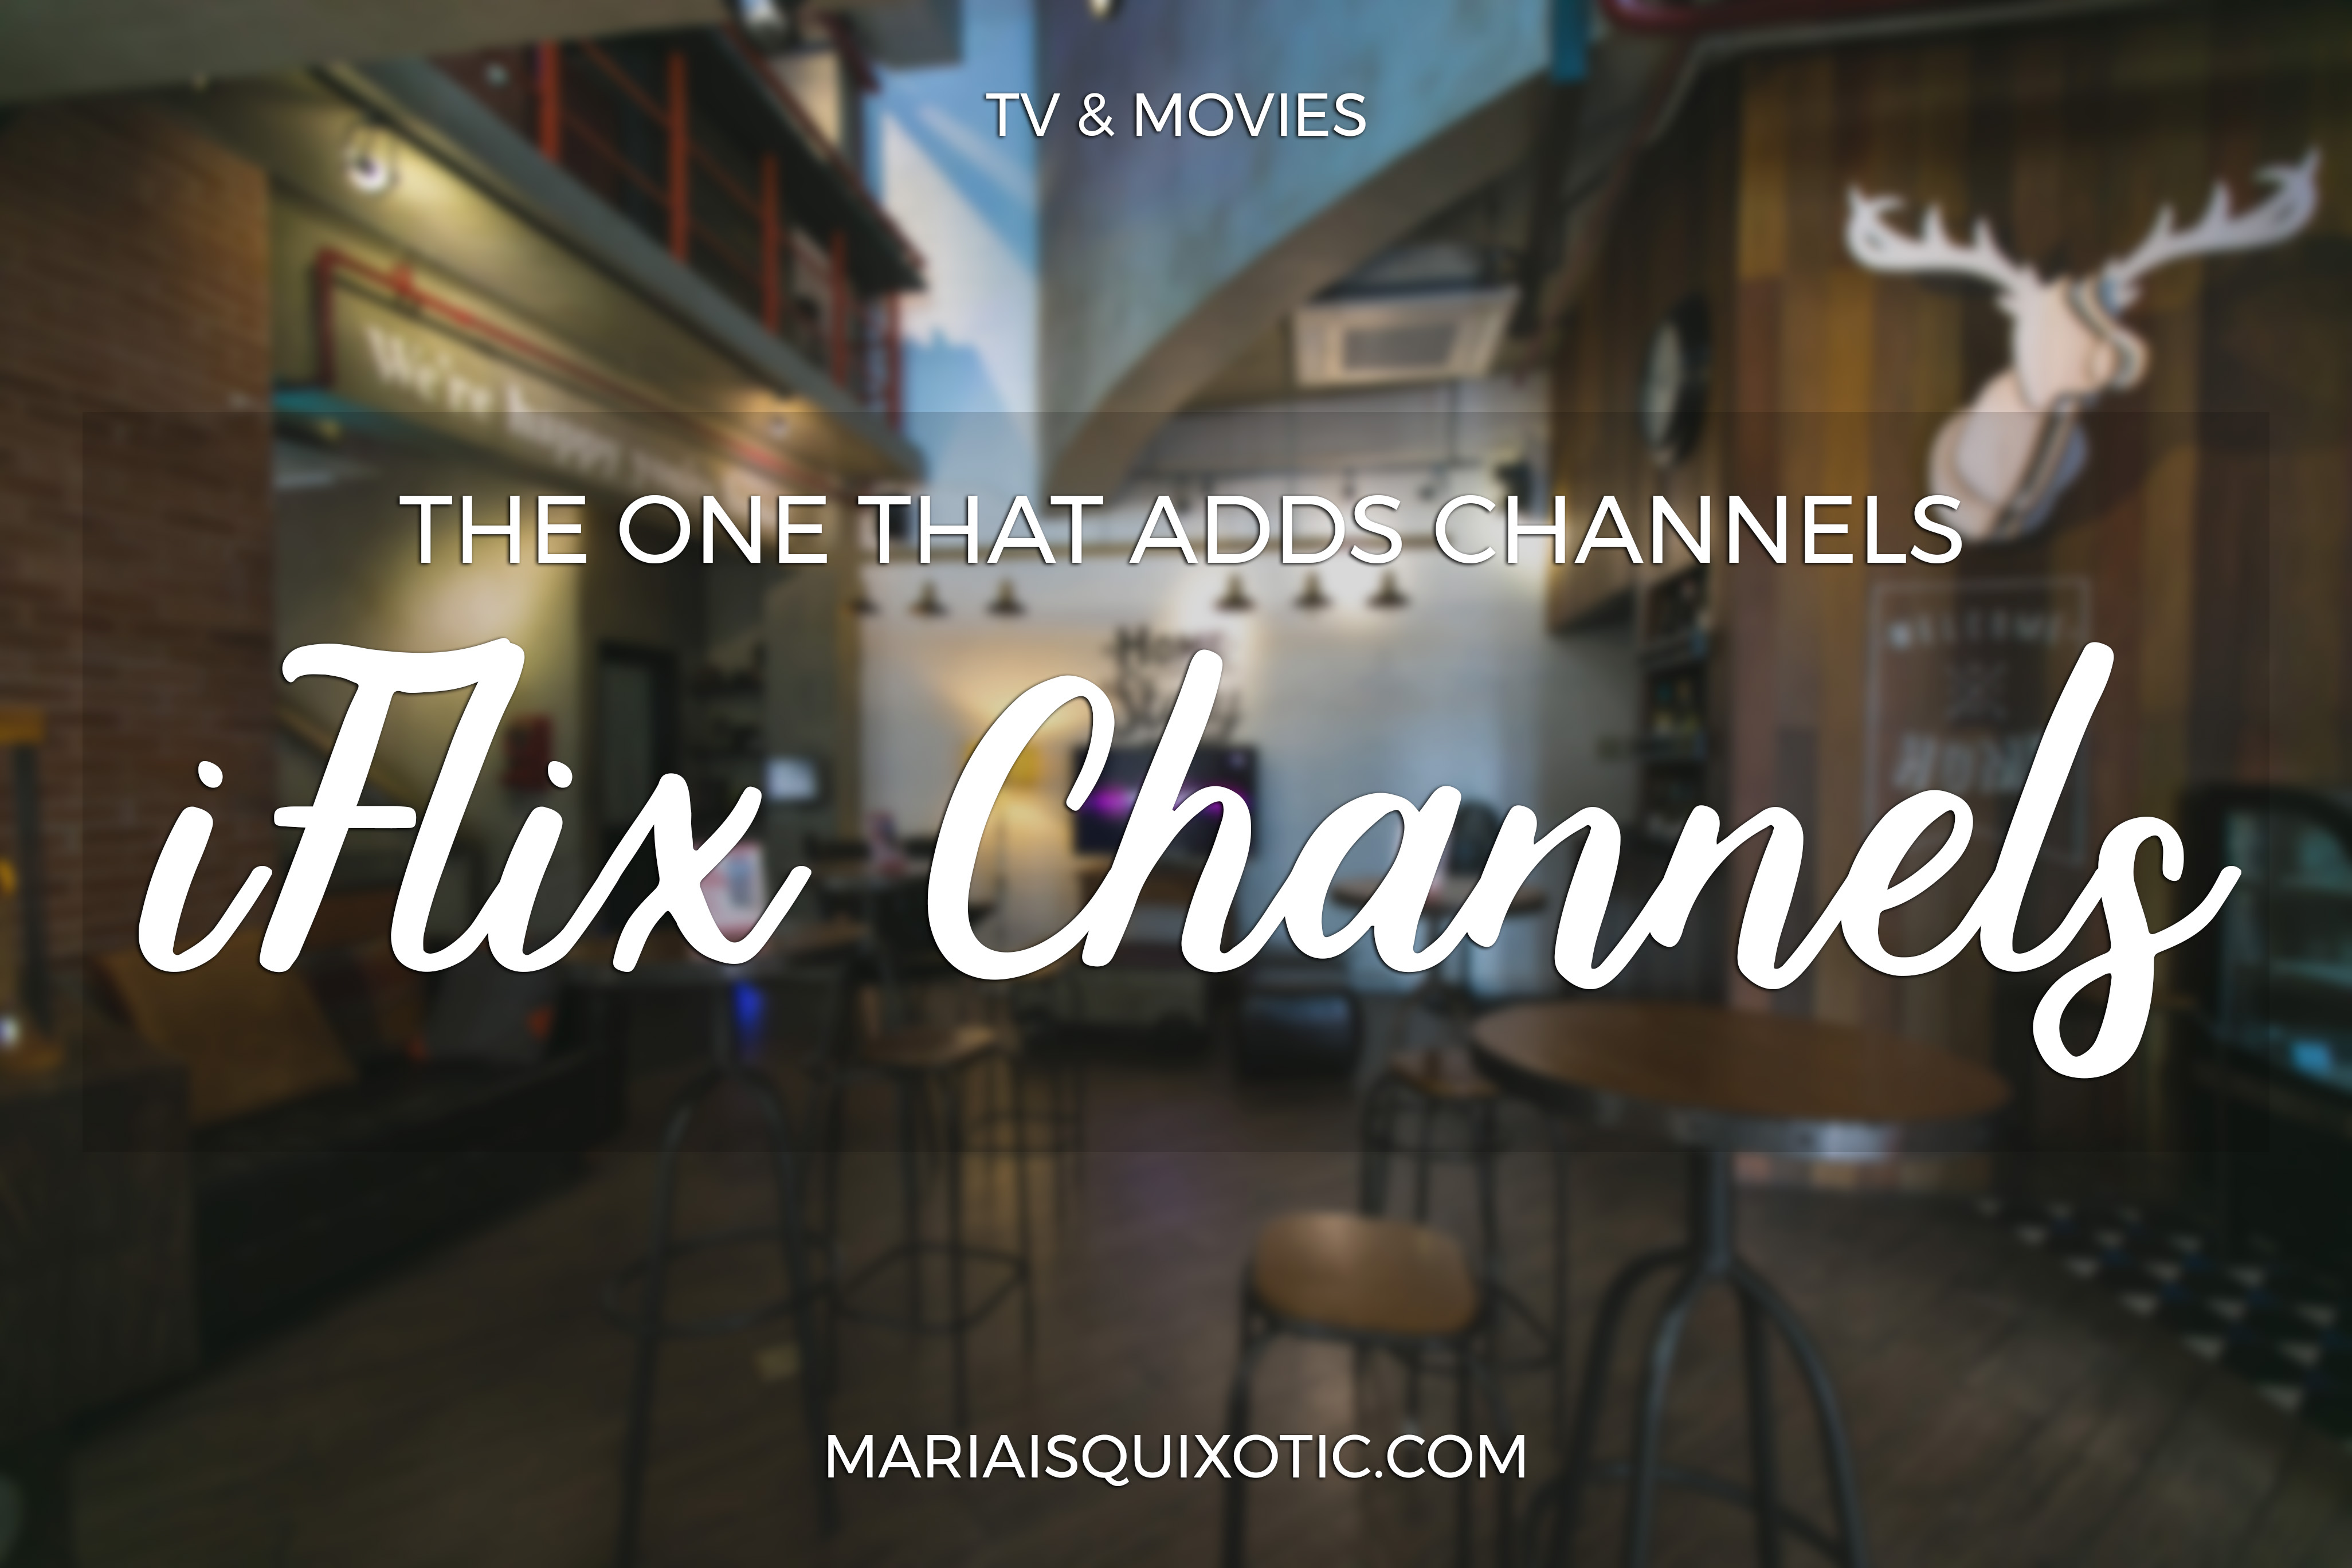 The One That Adds Channel: iFlix Channels